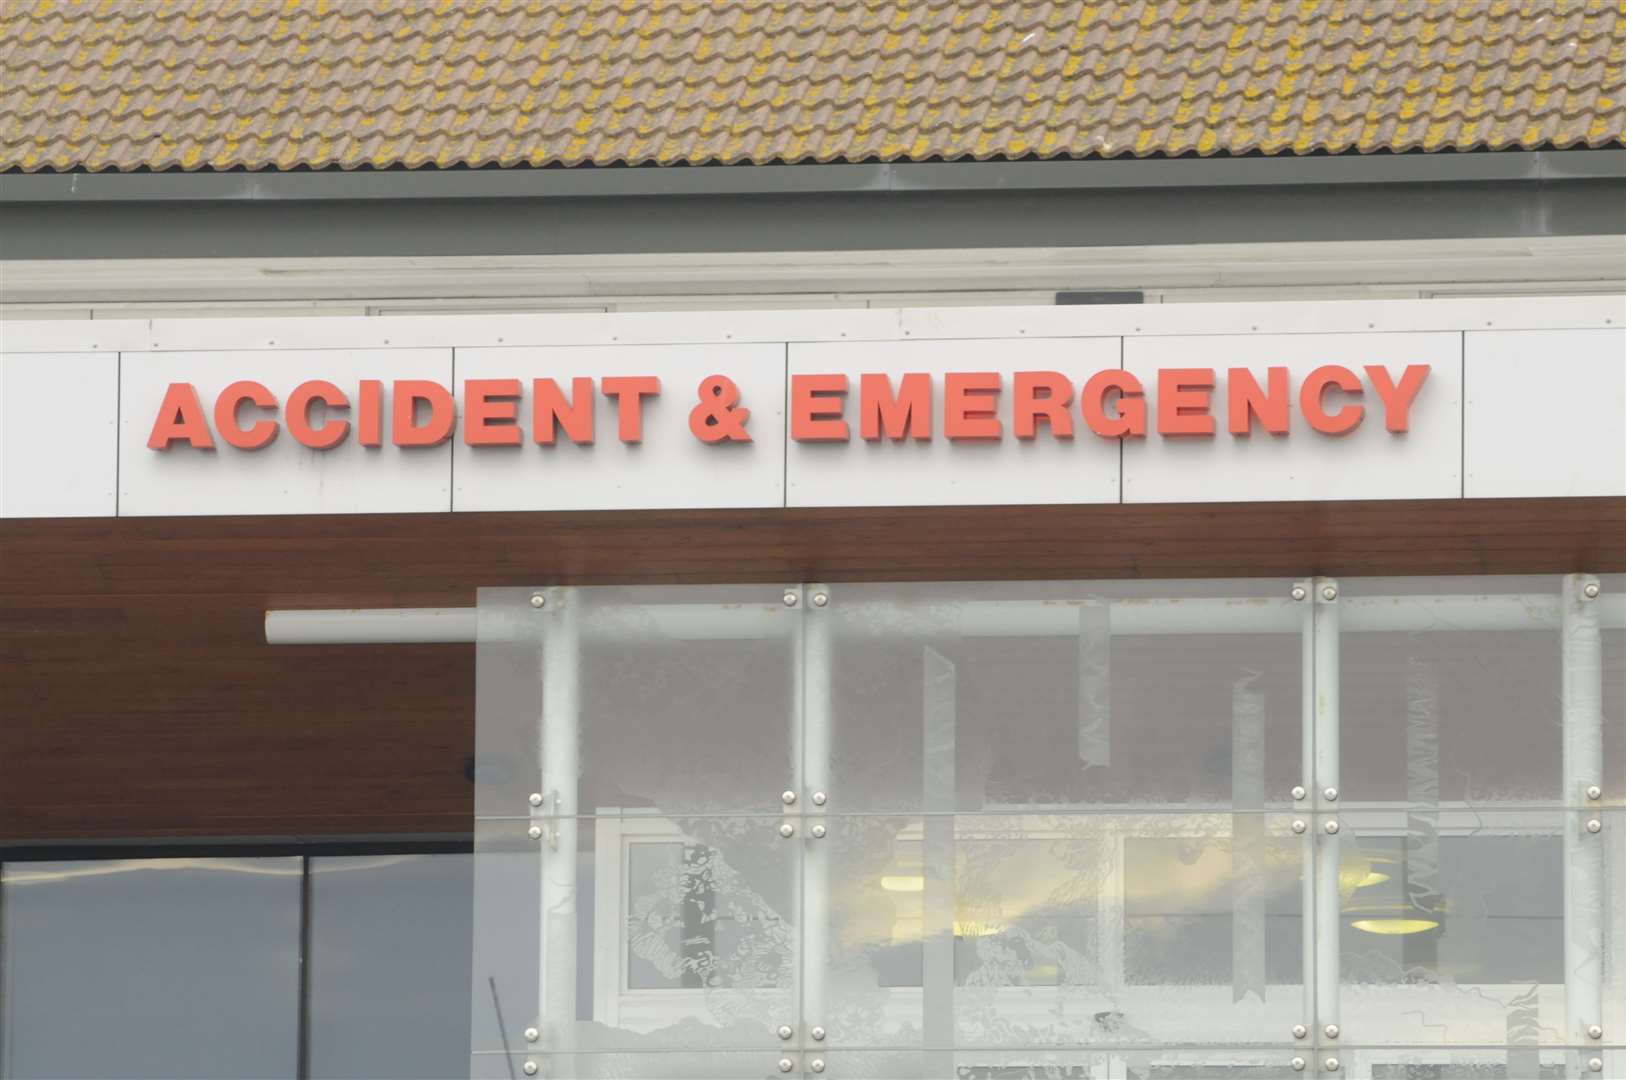 The A&E department at the QEQM Hospital